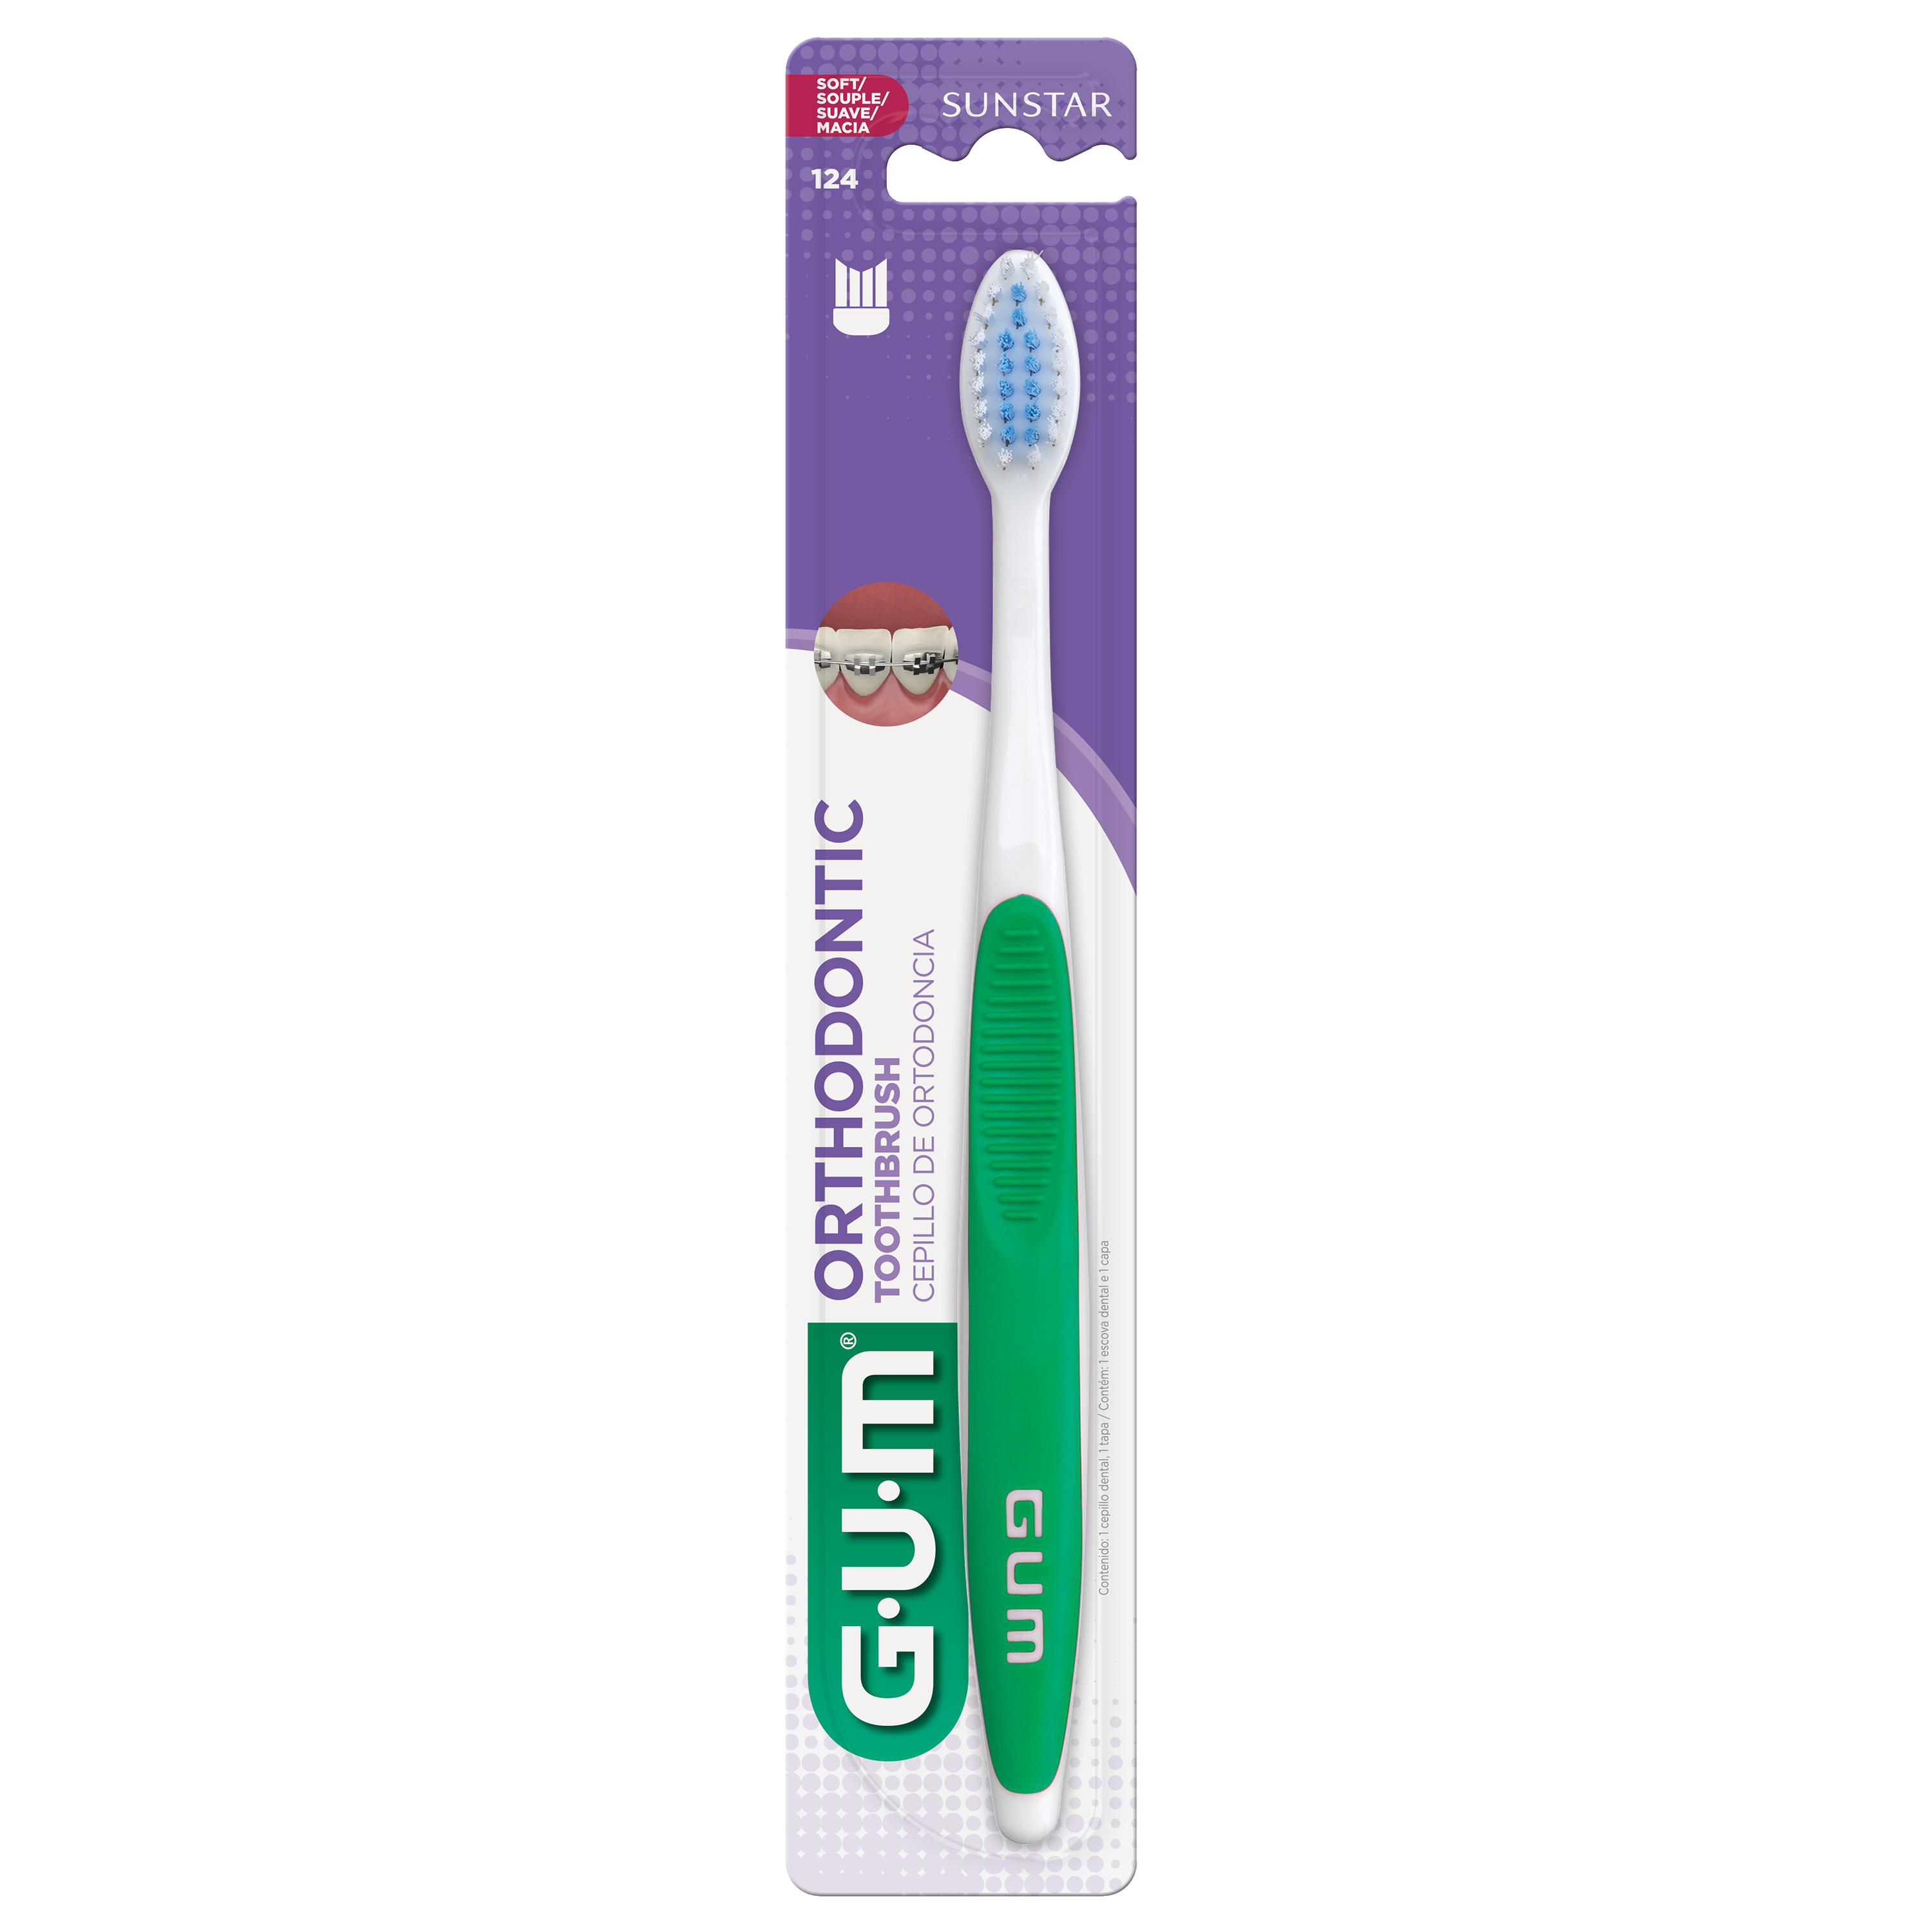 124LY-Product-Packaging-Toothbrush-Ortho-front-Green-1ct.png